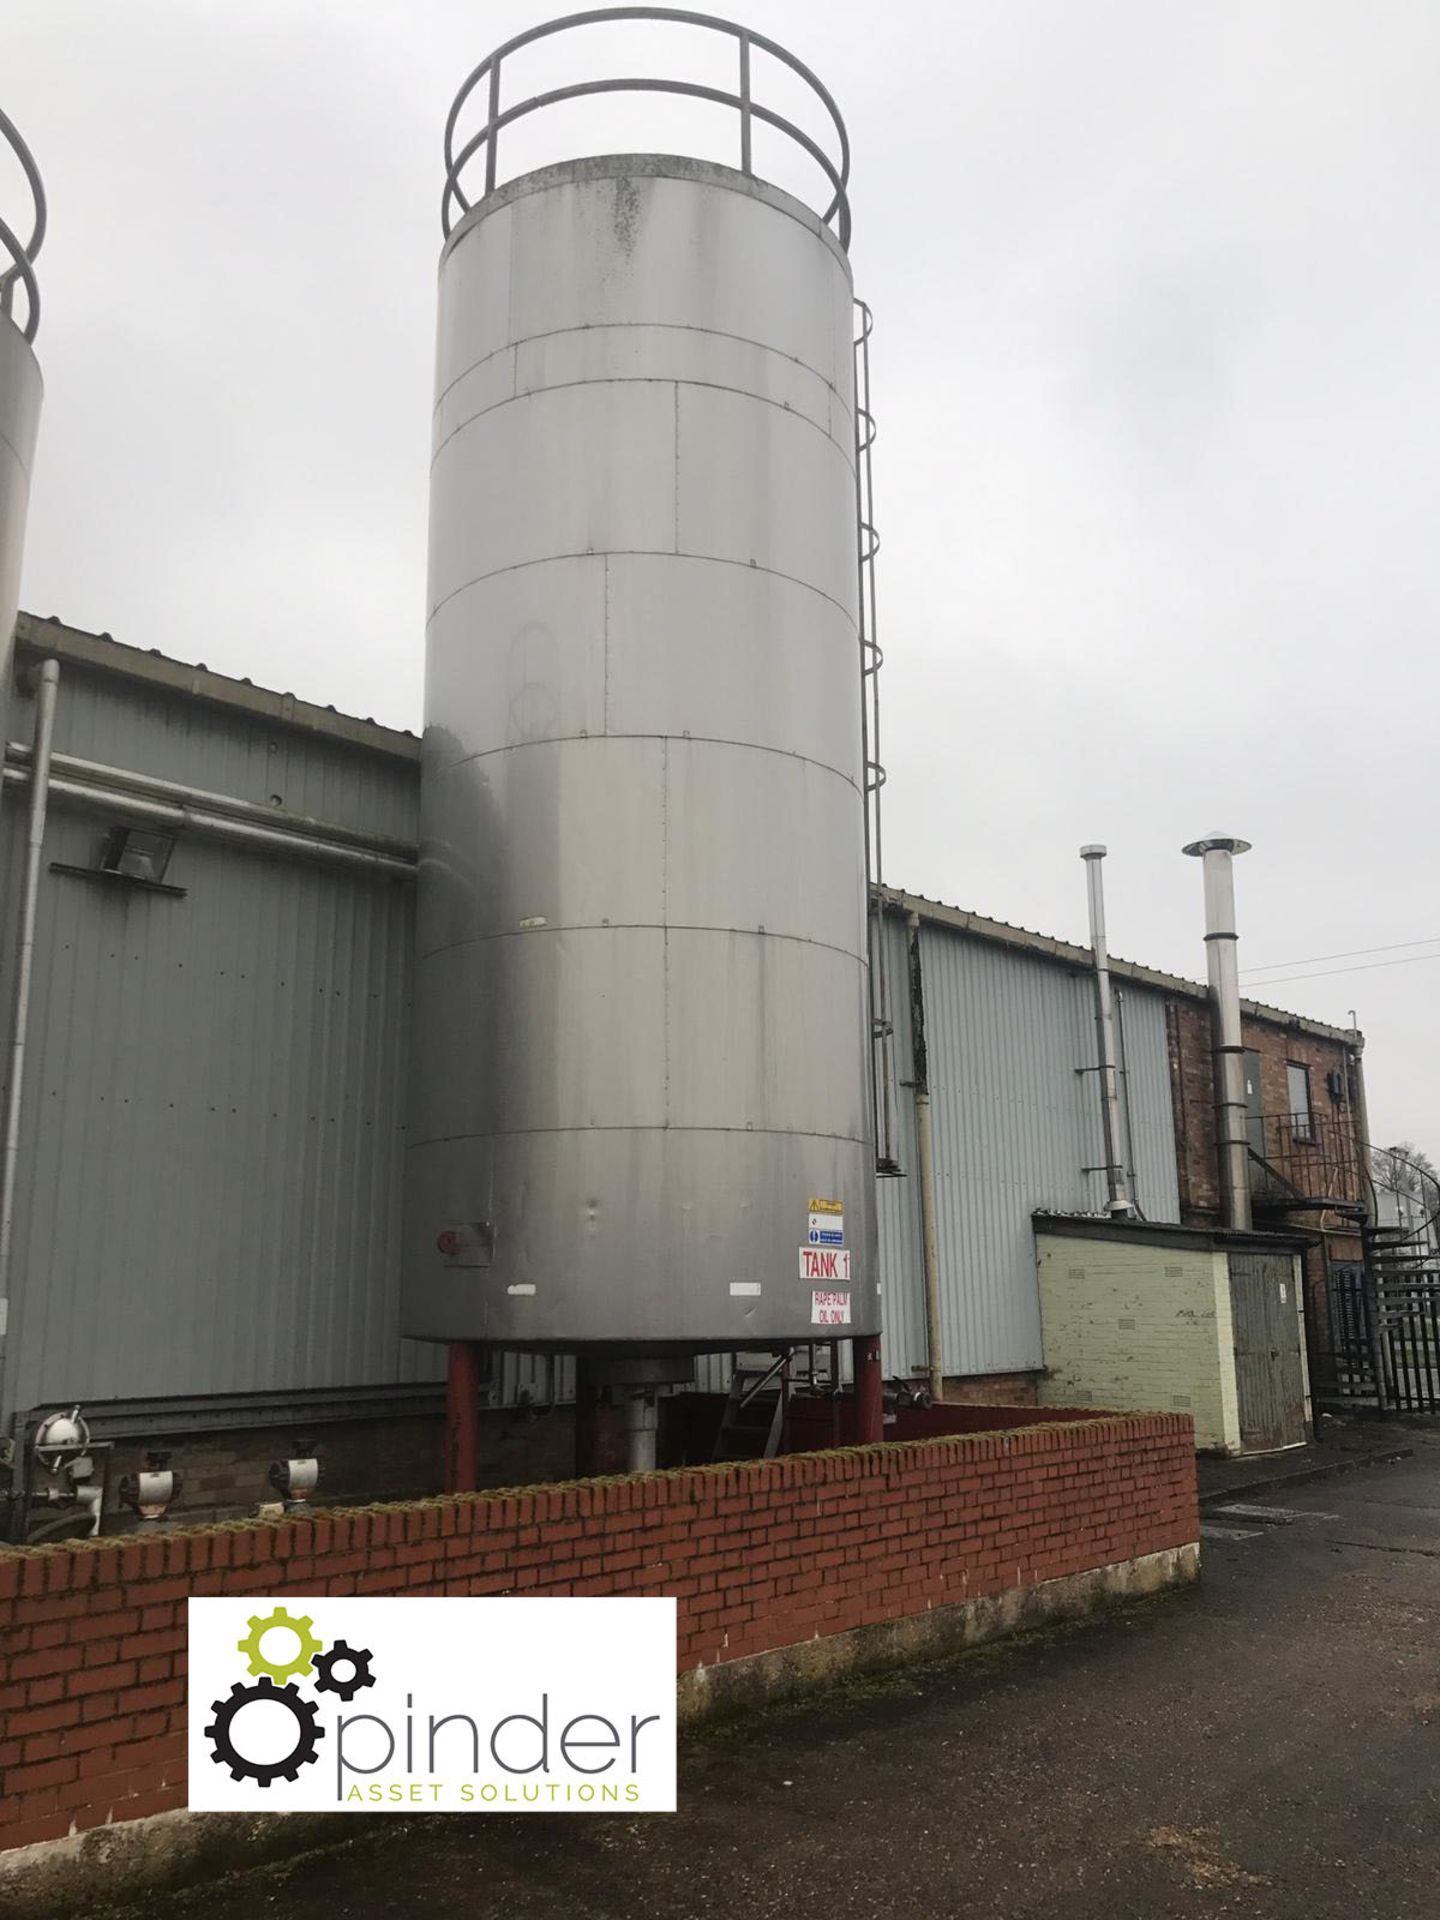 Stainless steel heated and insulated Tank, 2900mm diameter x 7300mm tall (location: Croxton) (please